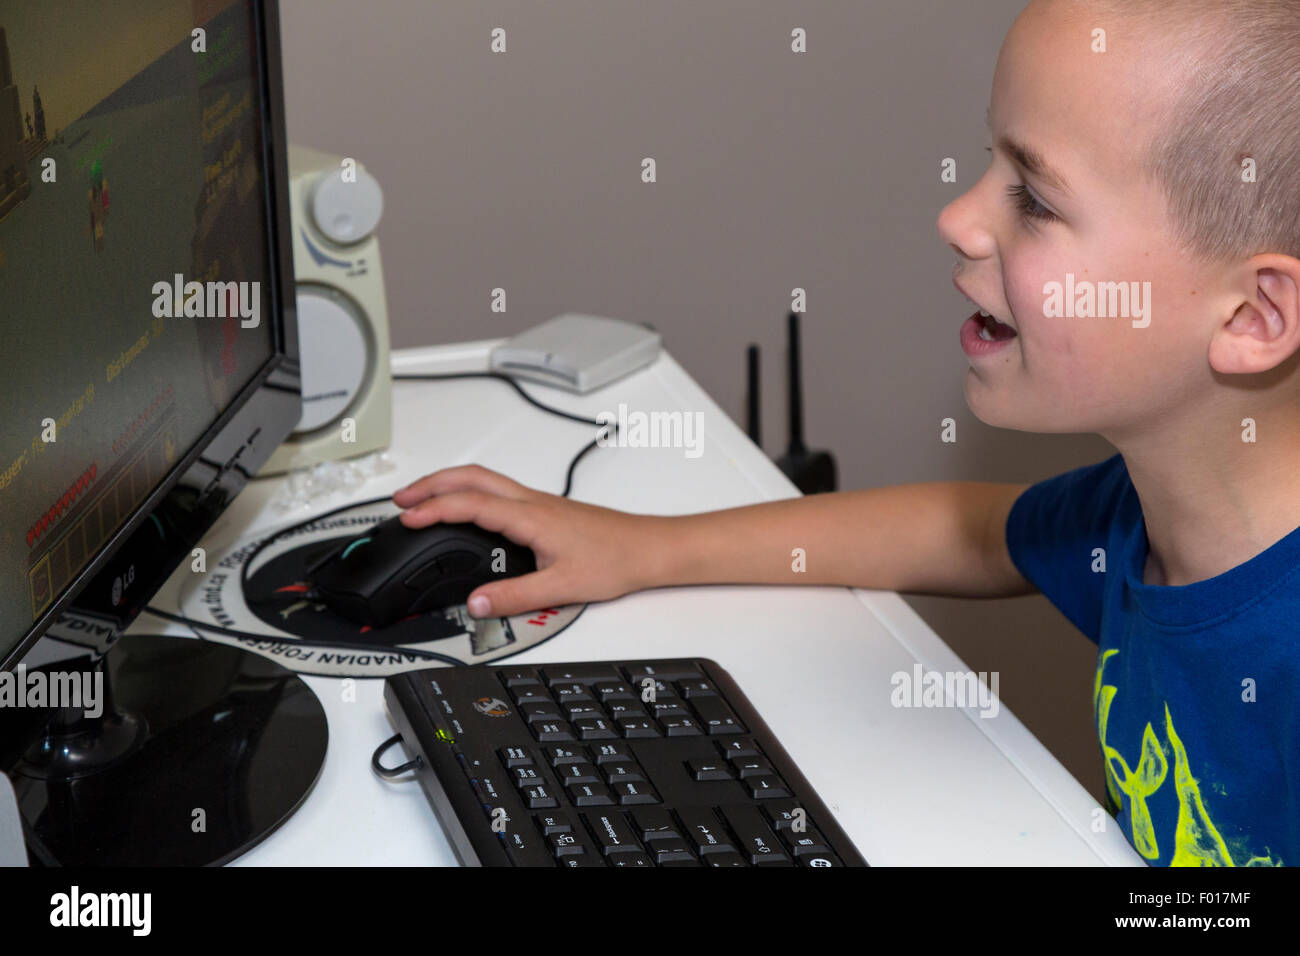 Seven-year-old Boy Playing Video Game.  MR Stock Photo